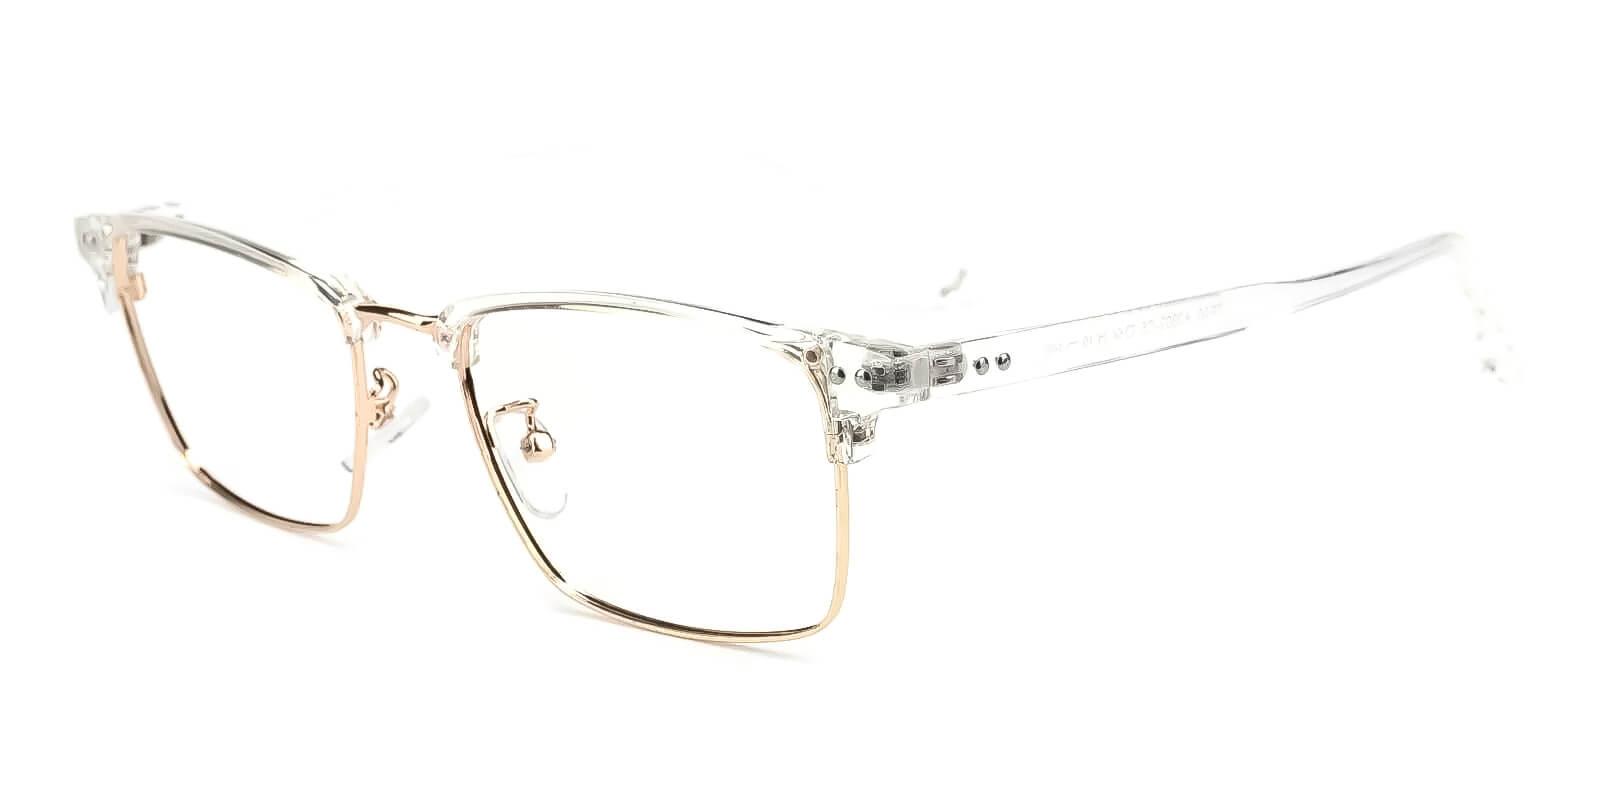 Venti Translucent TR Eyeglasses , Fashion , NosePads Frames from ABBE Glasses